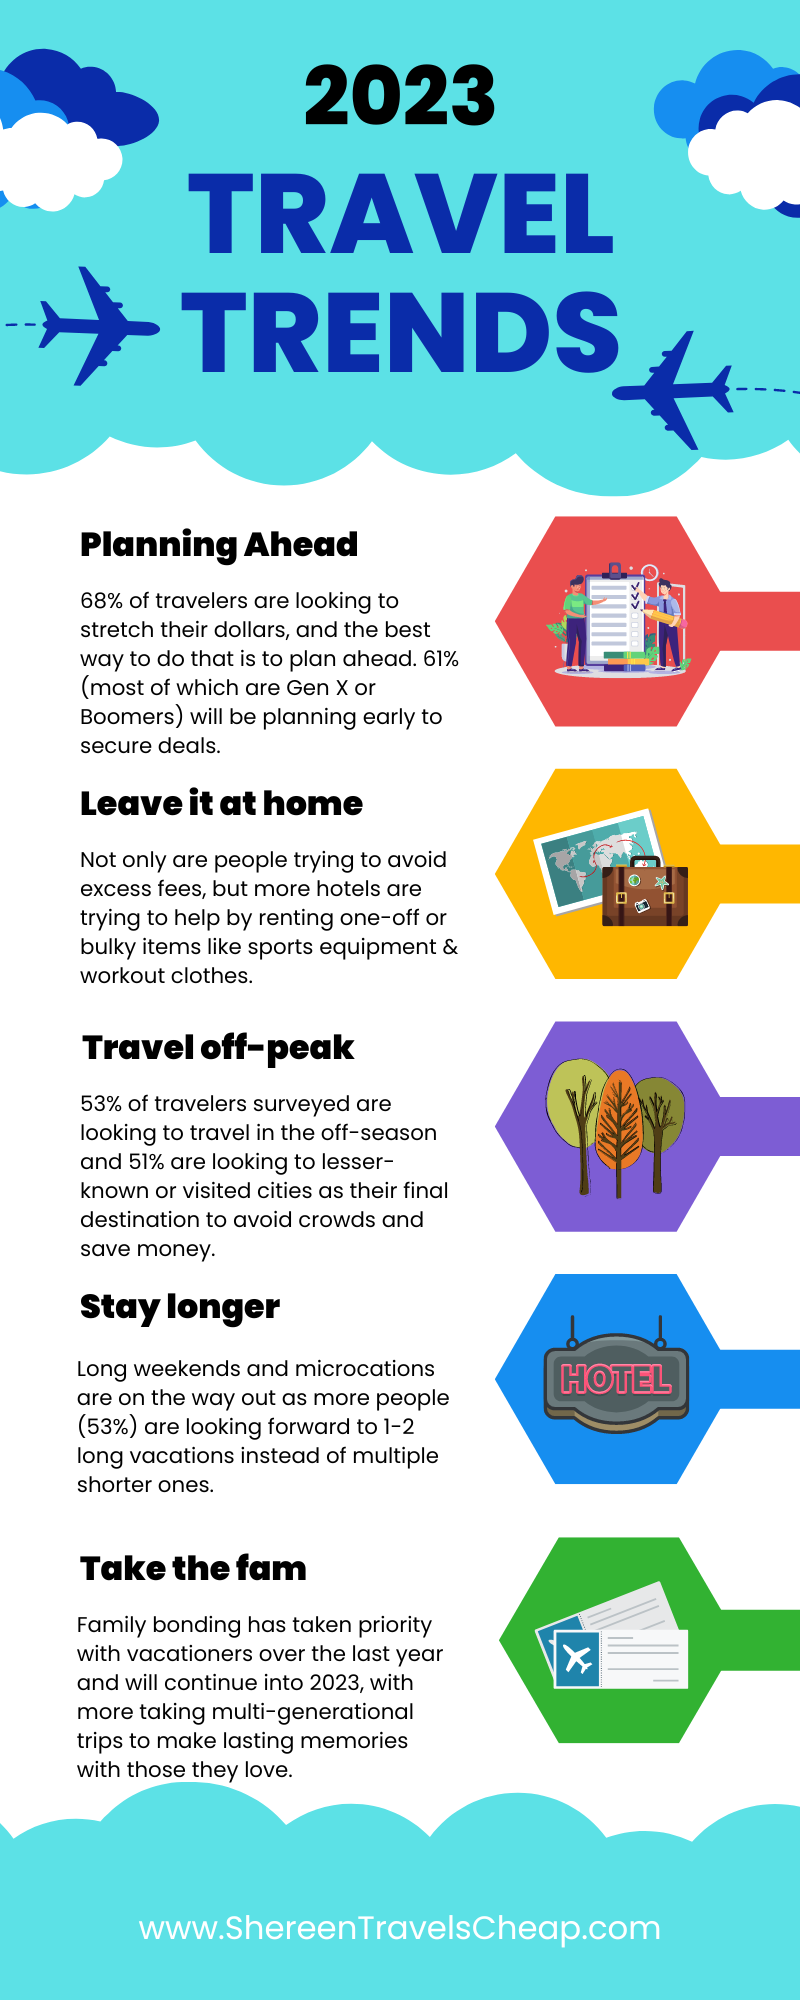 you can look forward to posts on how to pack lighter, when you should start looking/booking airfare, how to enjoy your family, instead of wanting to stab them, on a vacation, and why family trips are important and how to save when there are more of you than usual.